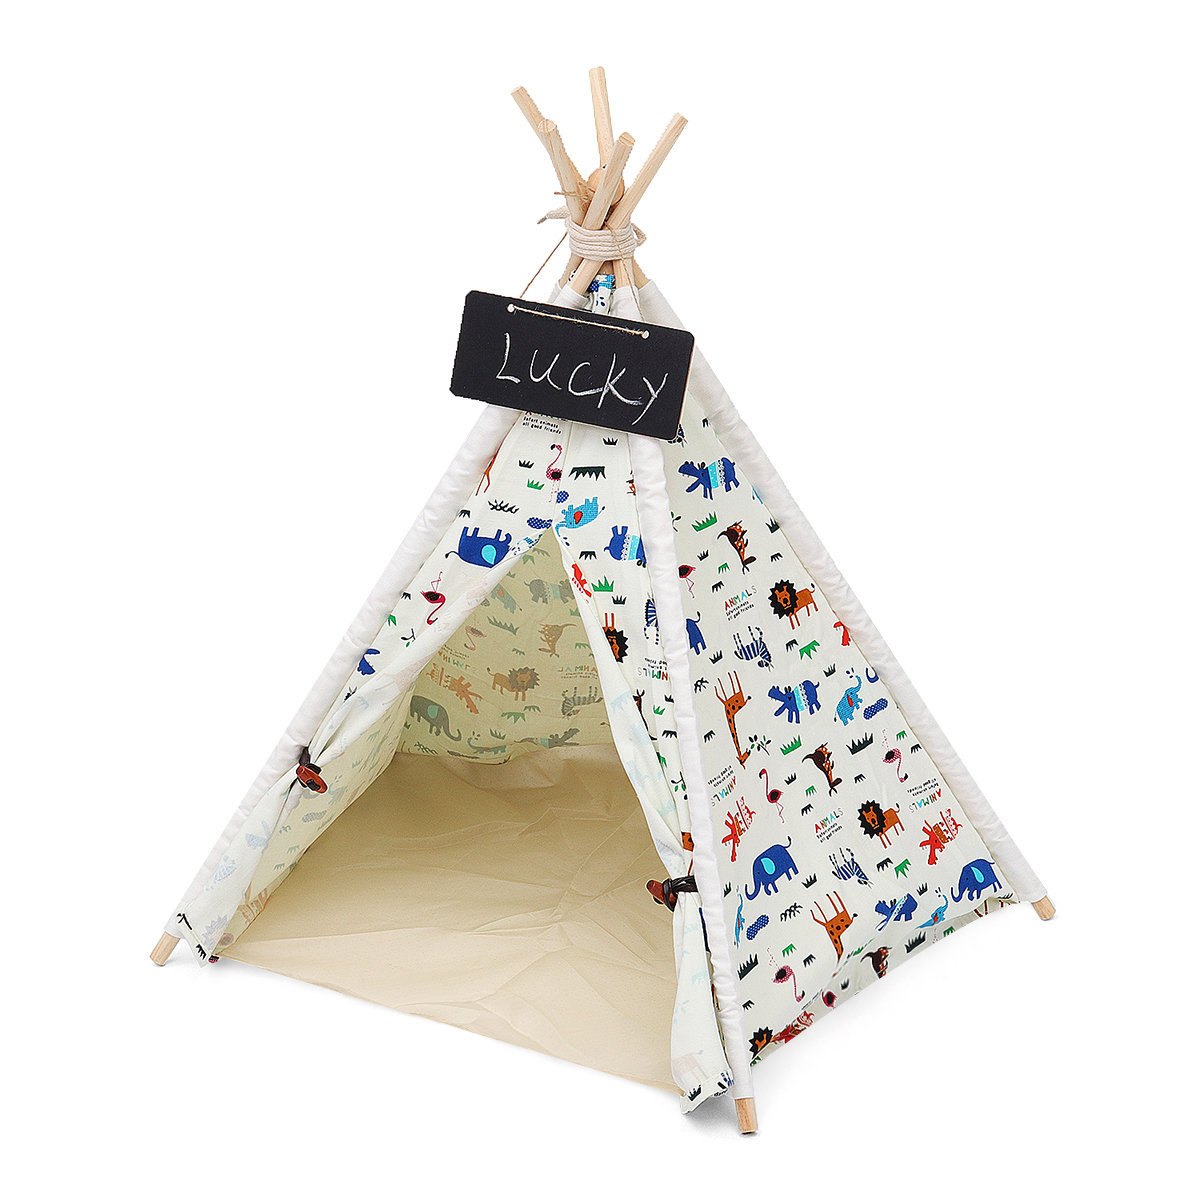 Pets Teepee Tent Dogs Home Canvas Pretend Play Playhouse Tipi Outdoor Indoor